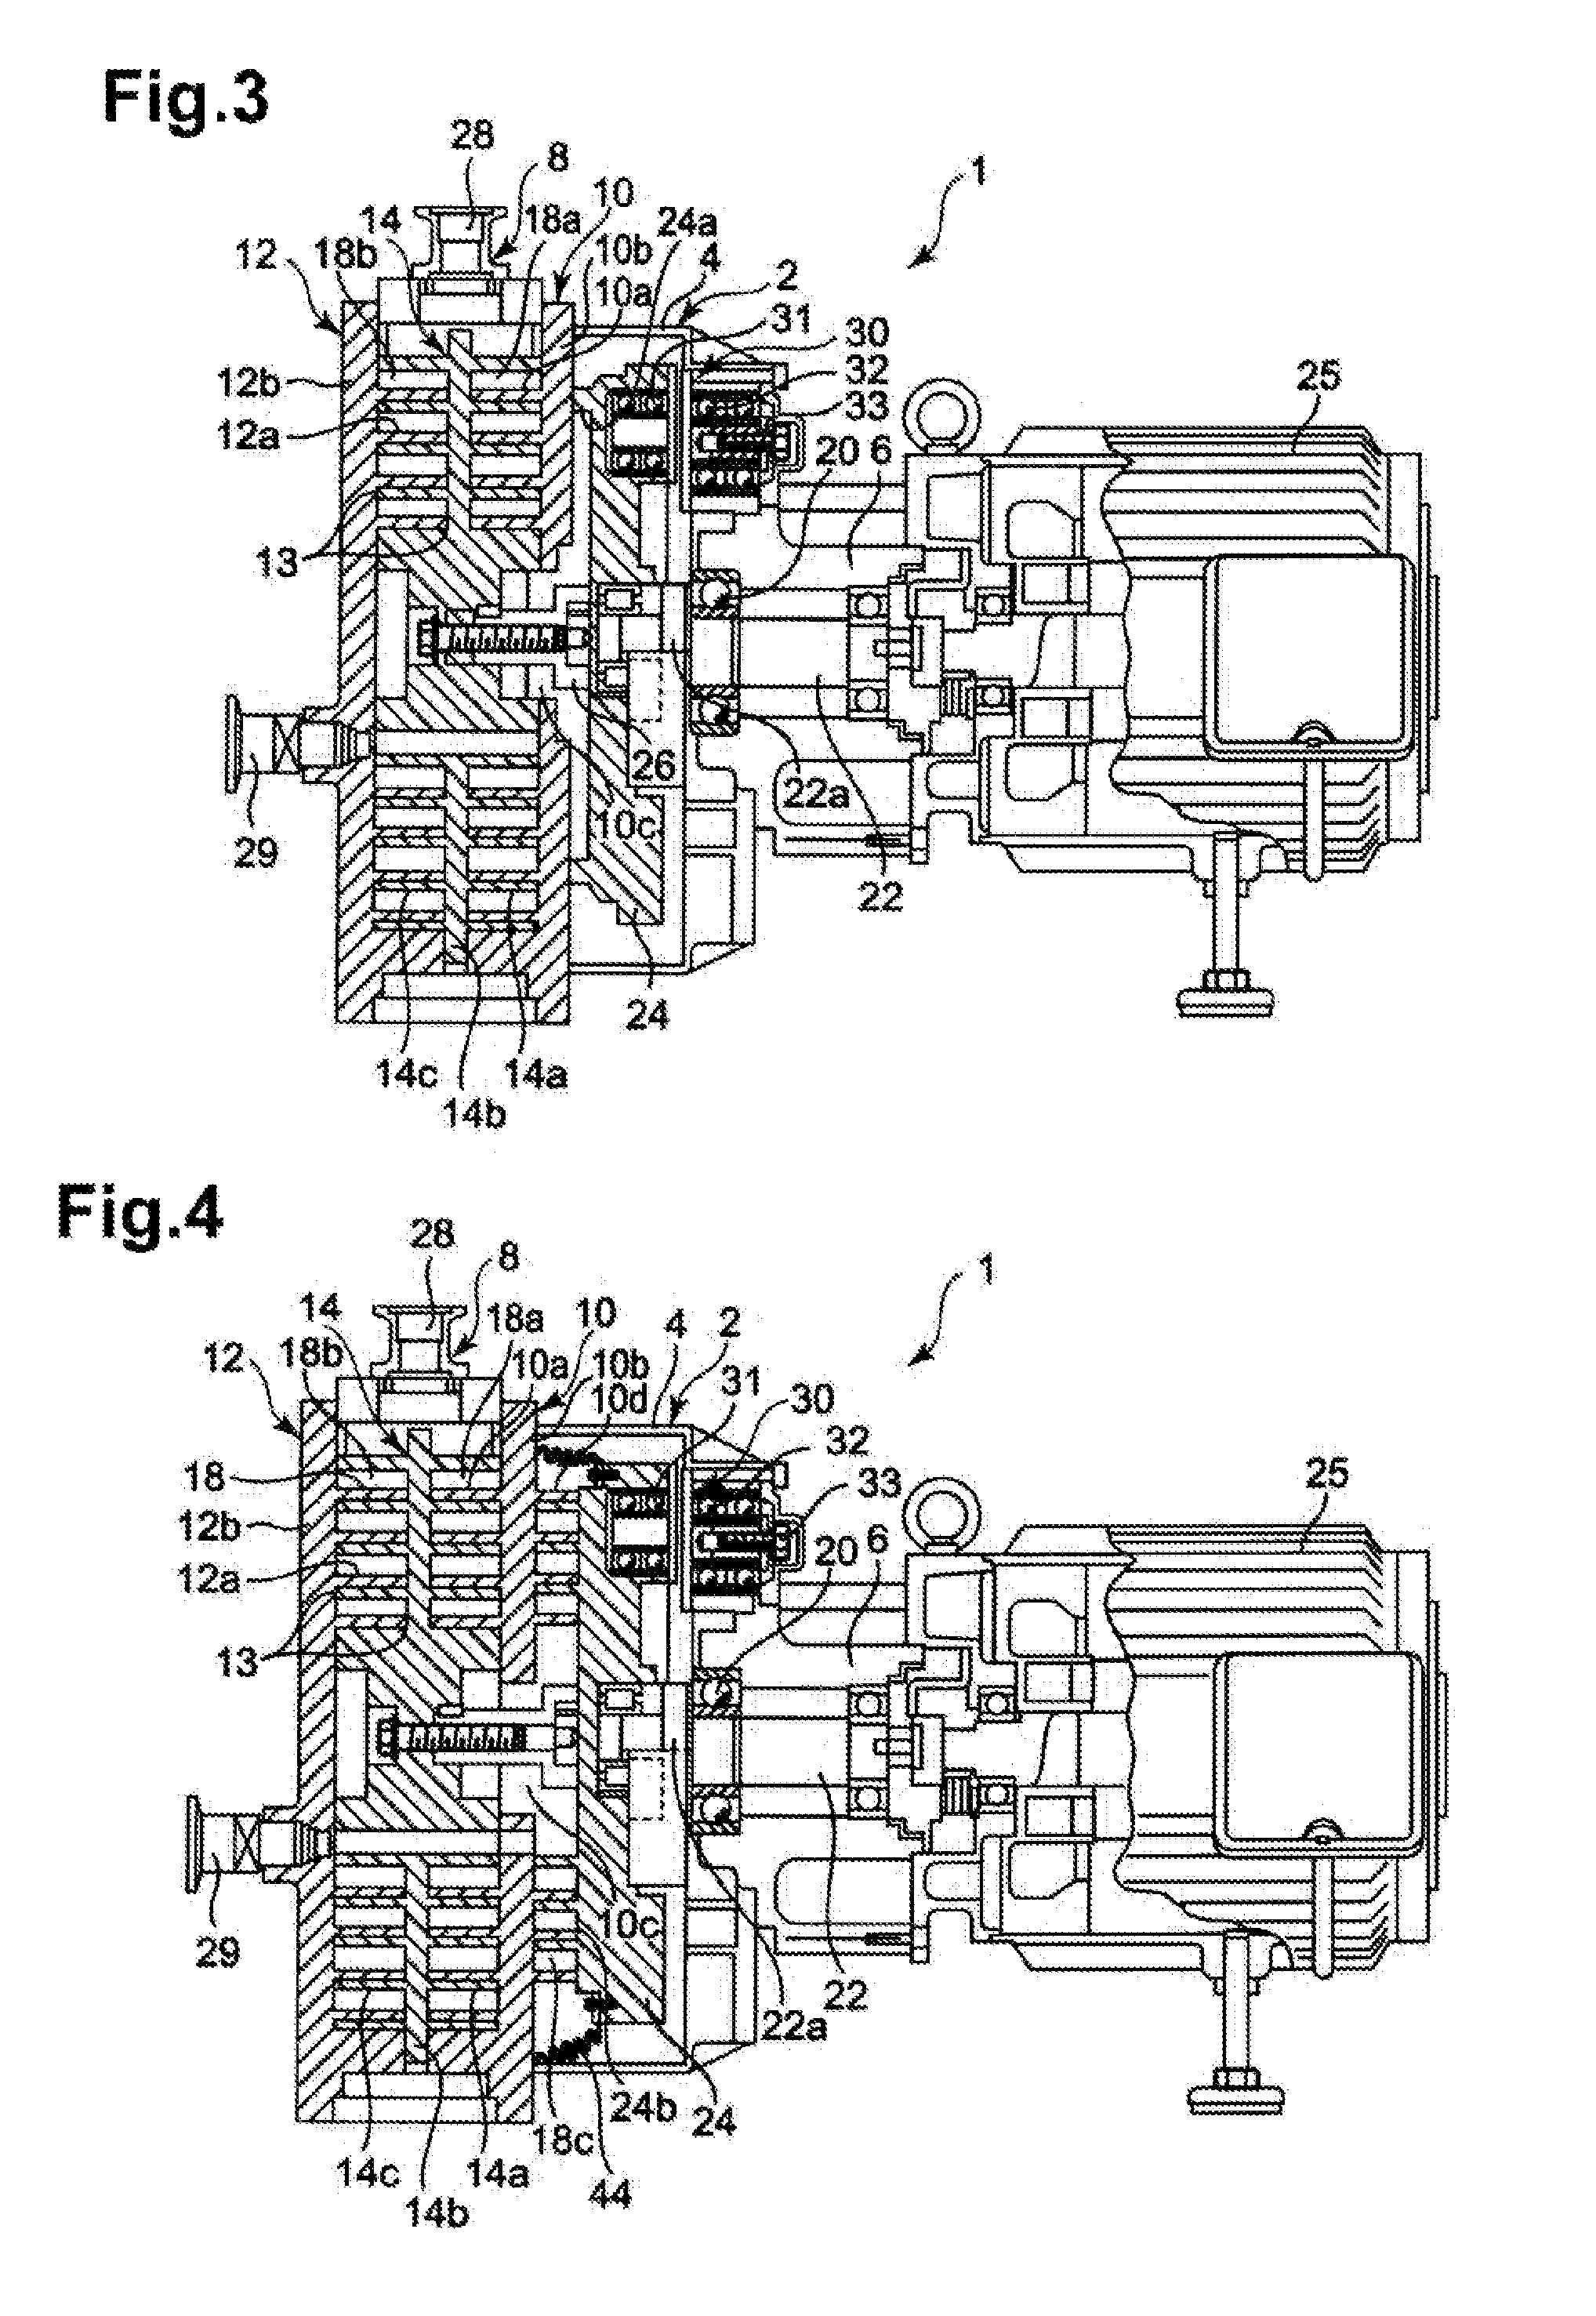 Scroll fluid machine with axial sealing unit